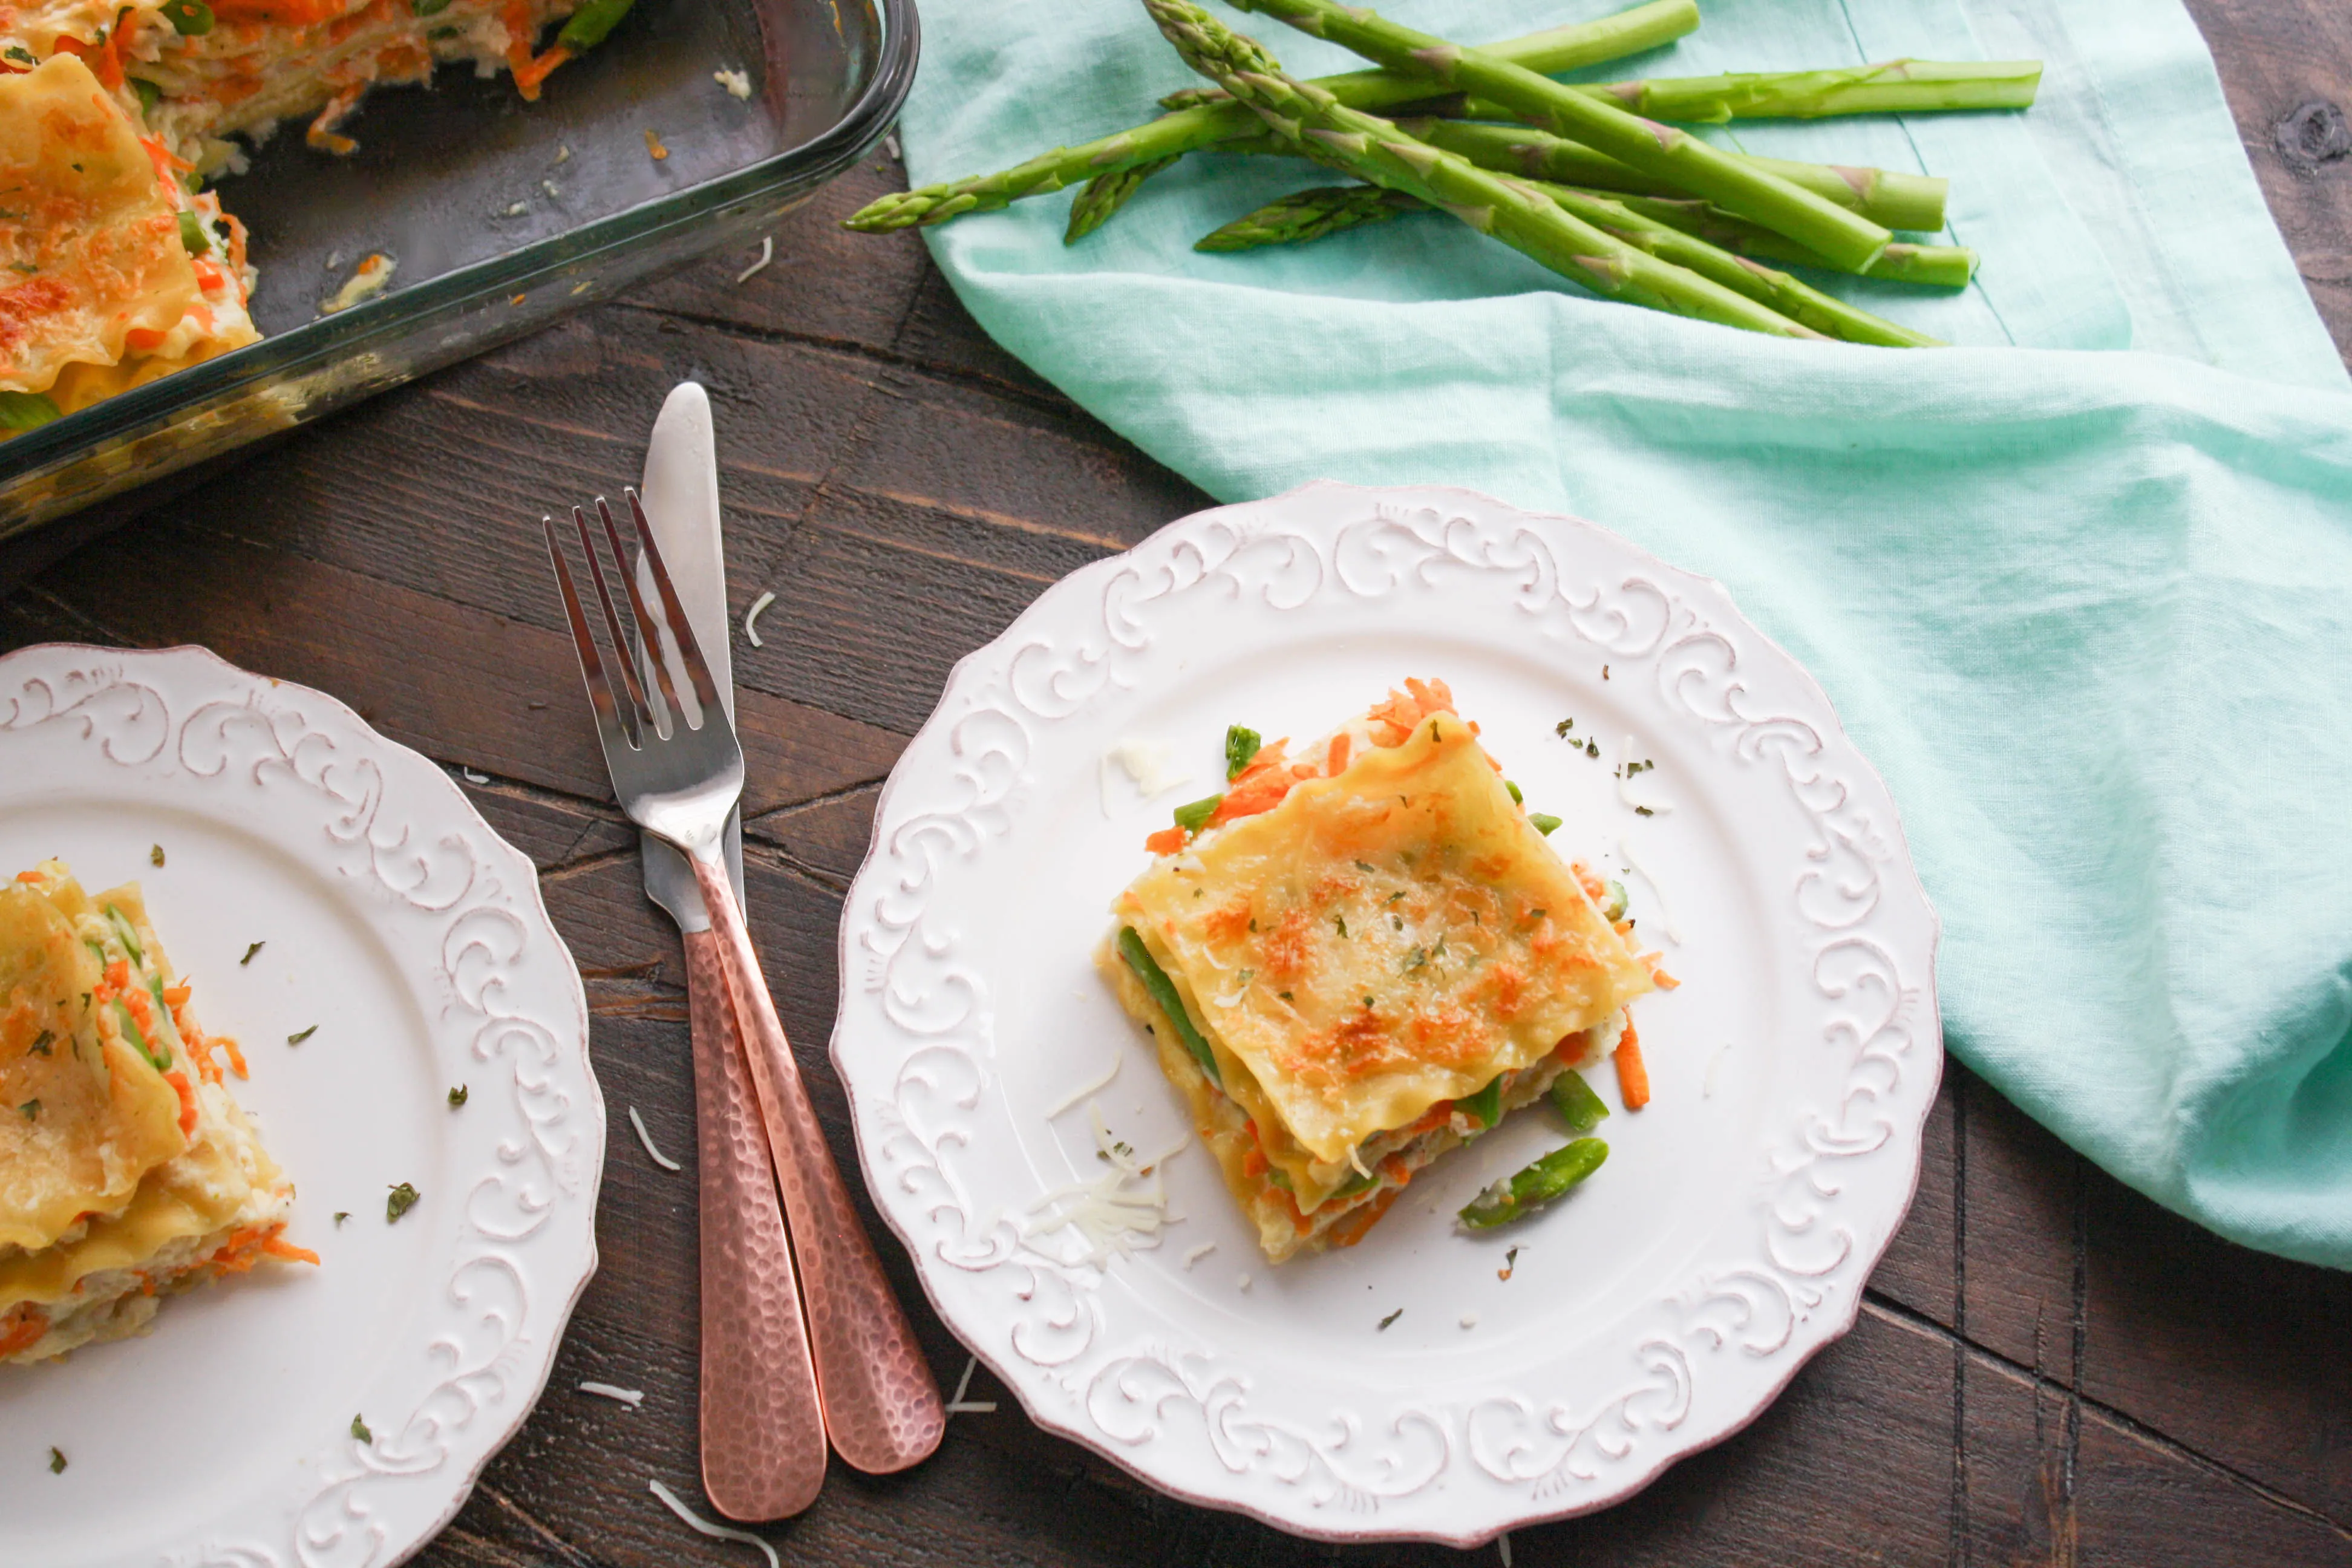 Asparagus and Sweet Potato Lasagna makes a tasty meal for the springtime. Asparagus and Sweet Potato Lasagna is creamy and rich, and delicious!